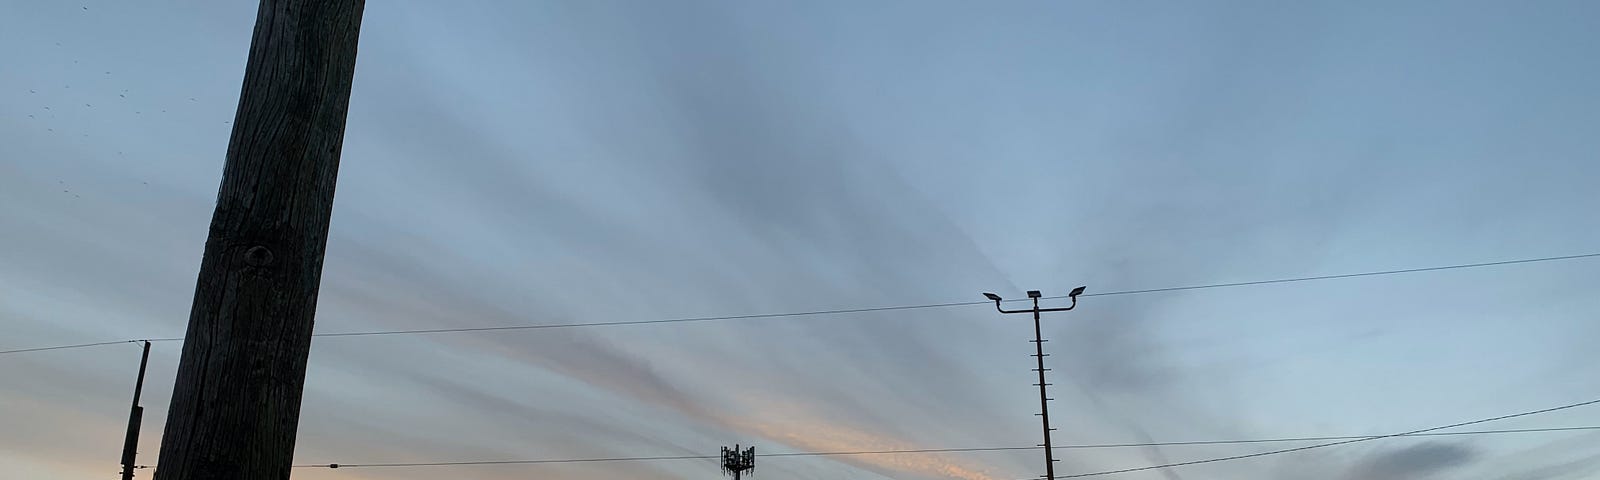 A sunset of pink and grey at the horizon in a light blue sky. a shadow of a water tower, electrical poles / wires, & a street